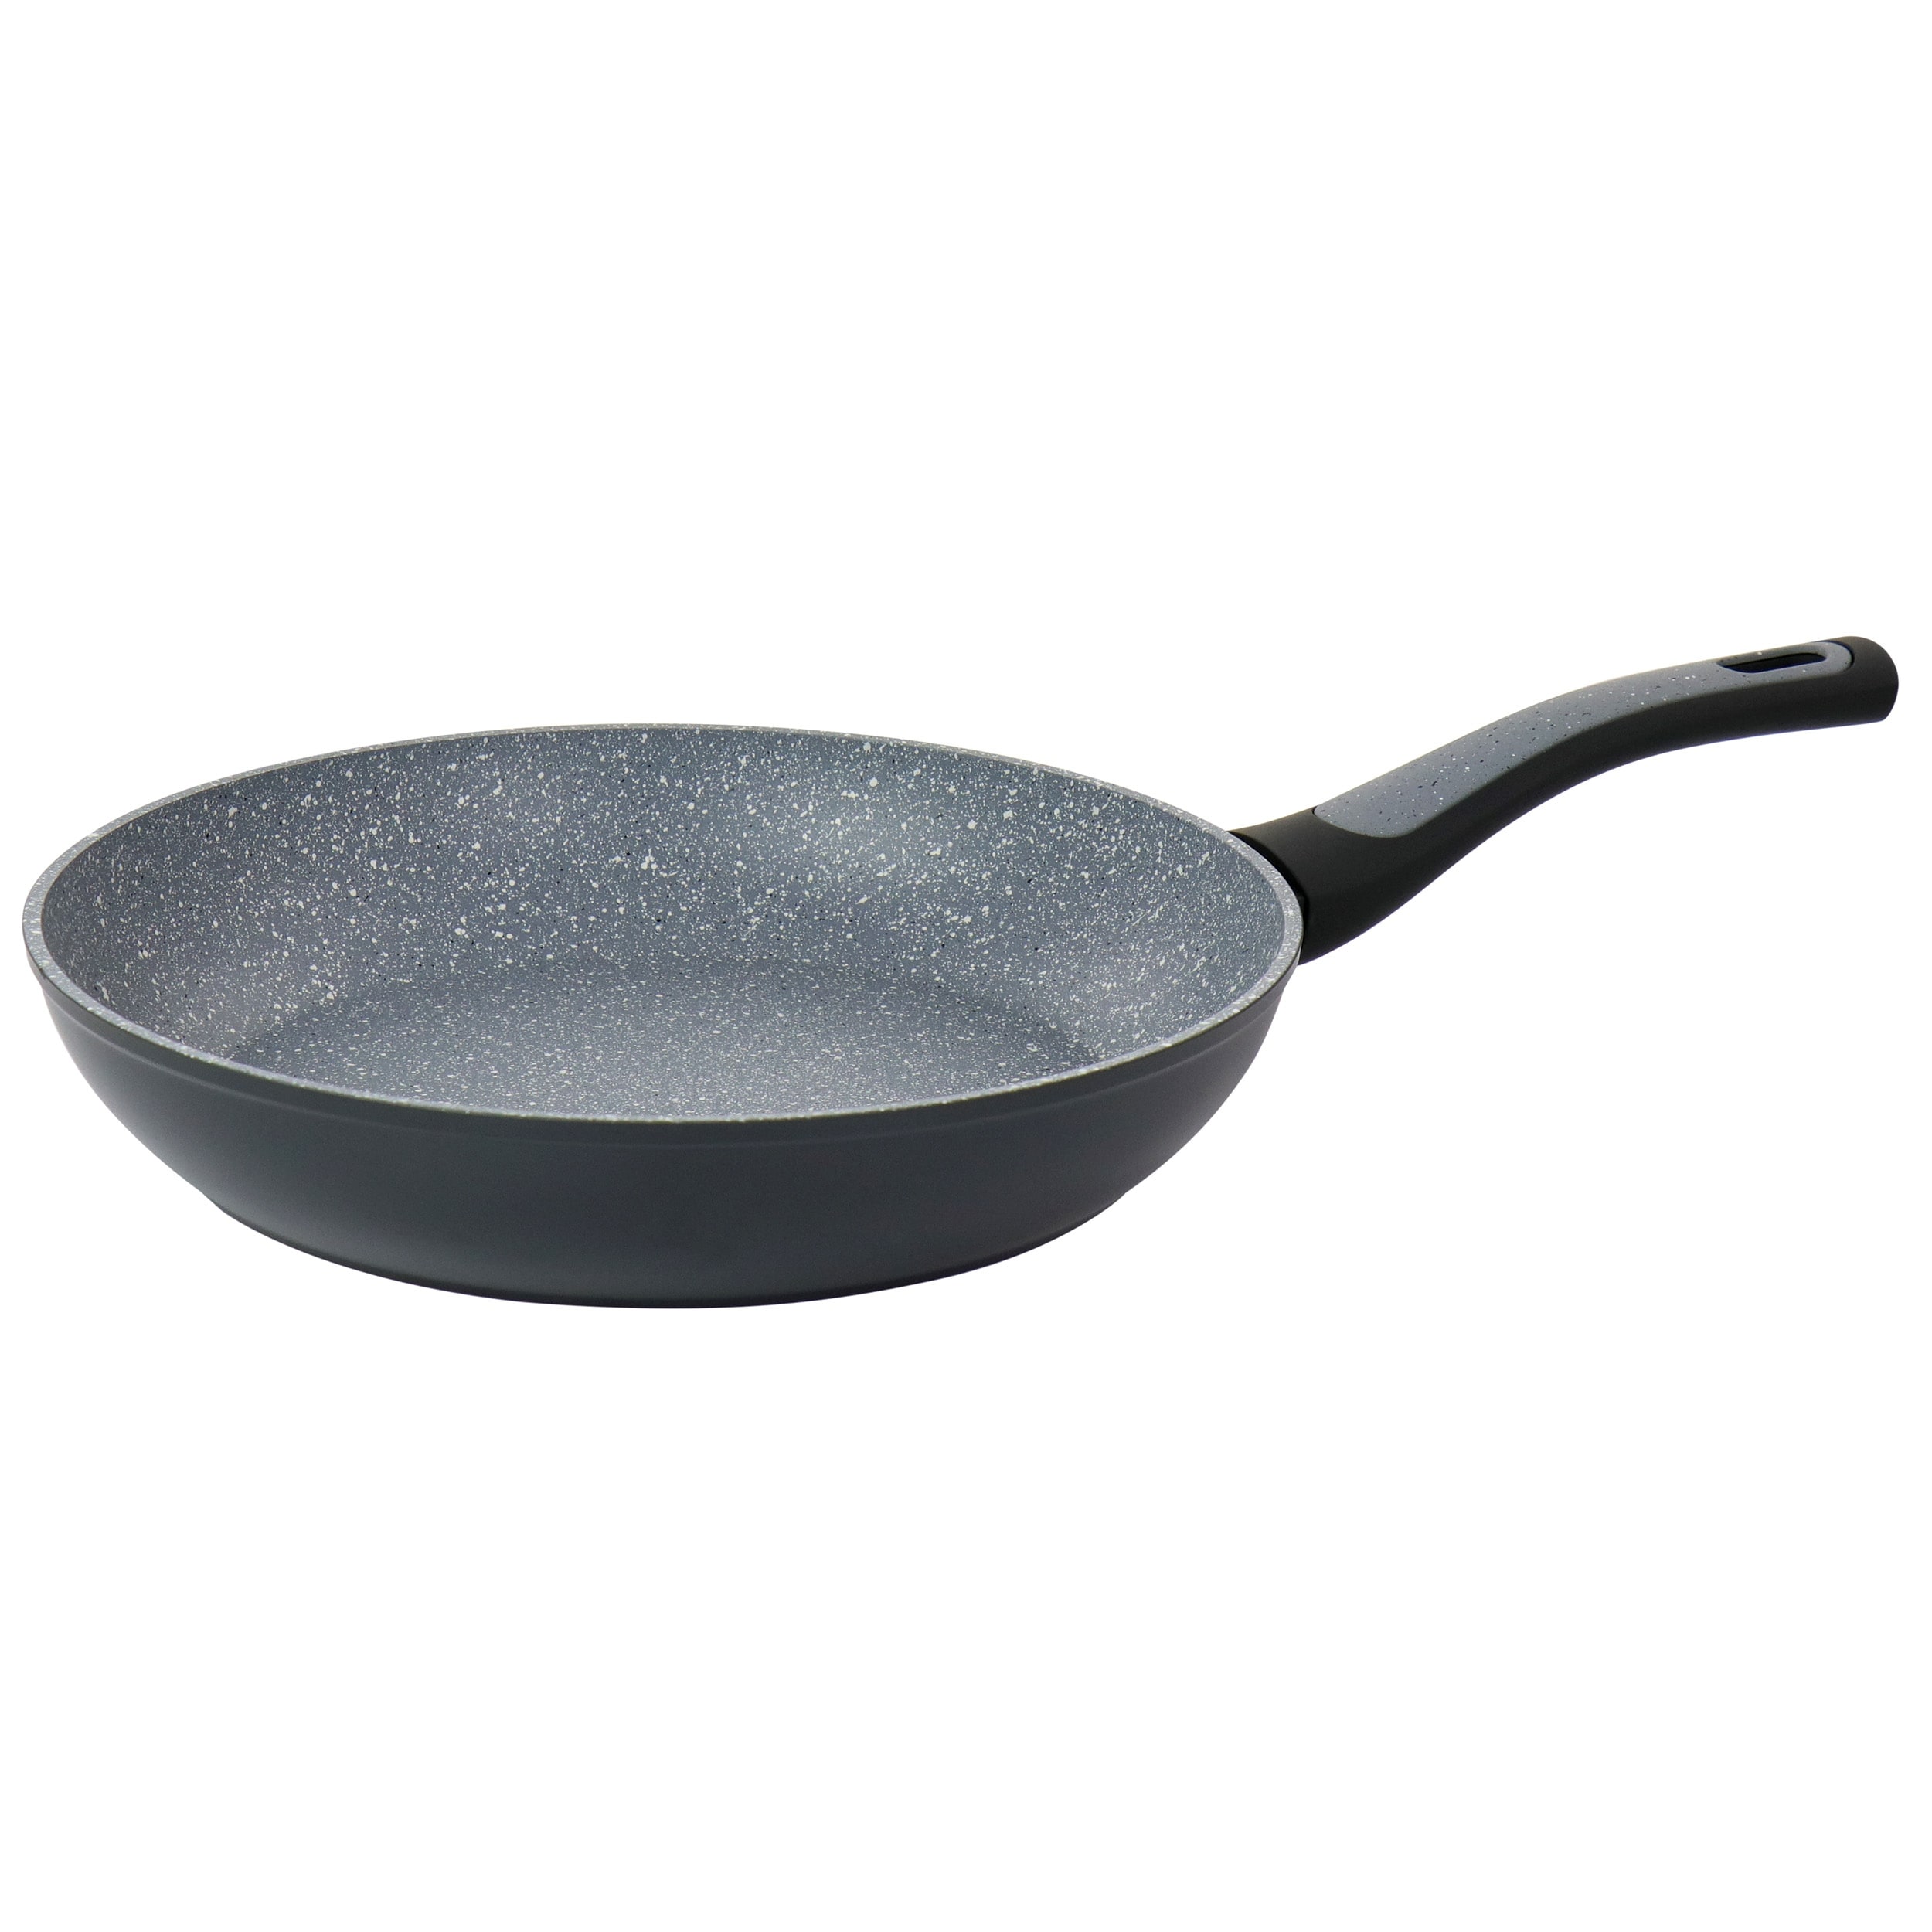 https://ak1.ostkcdn.com/images/products/is/images/direct/76422b0a455706470d51a3fd60fd3e0f154669b4/Oster-Bastone-10-Inch-Aluminum-Nonstick-Frying-Pan-in-Speckled-Gray.jpg